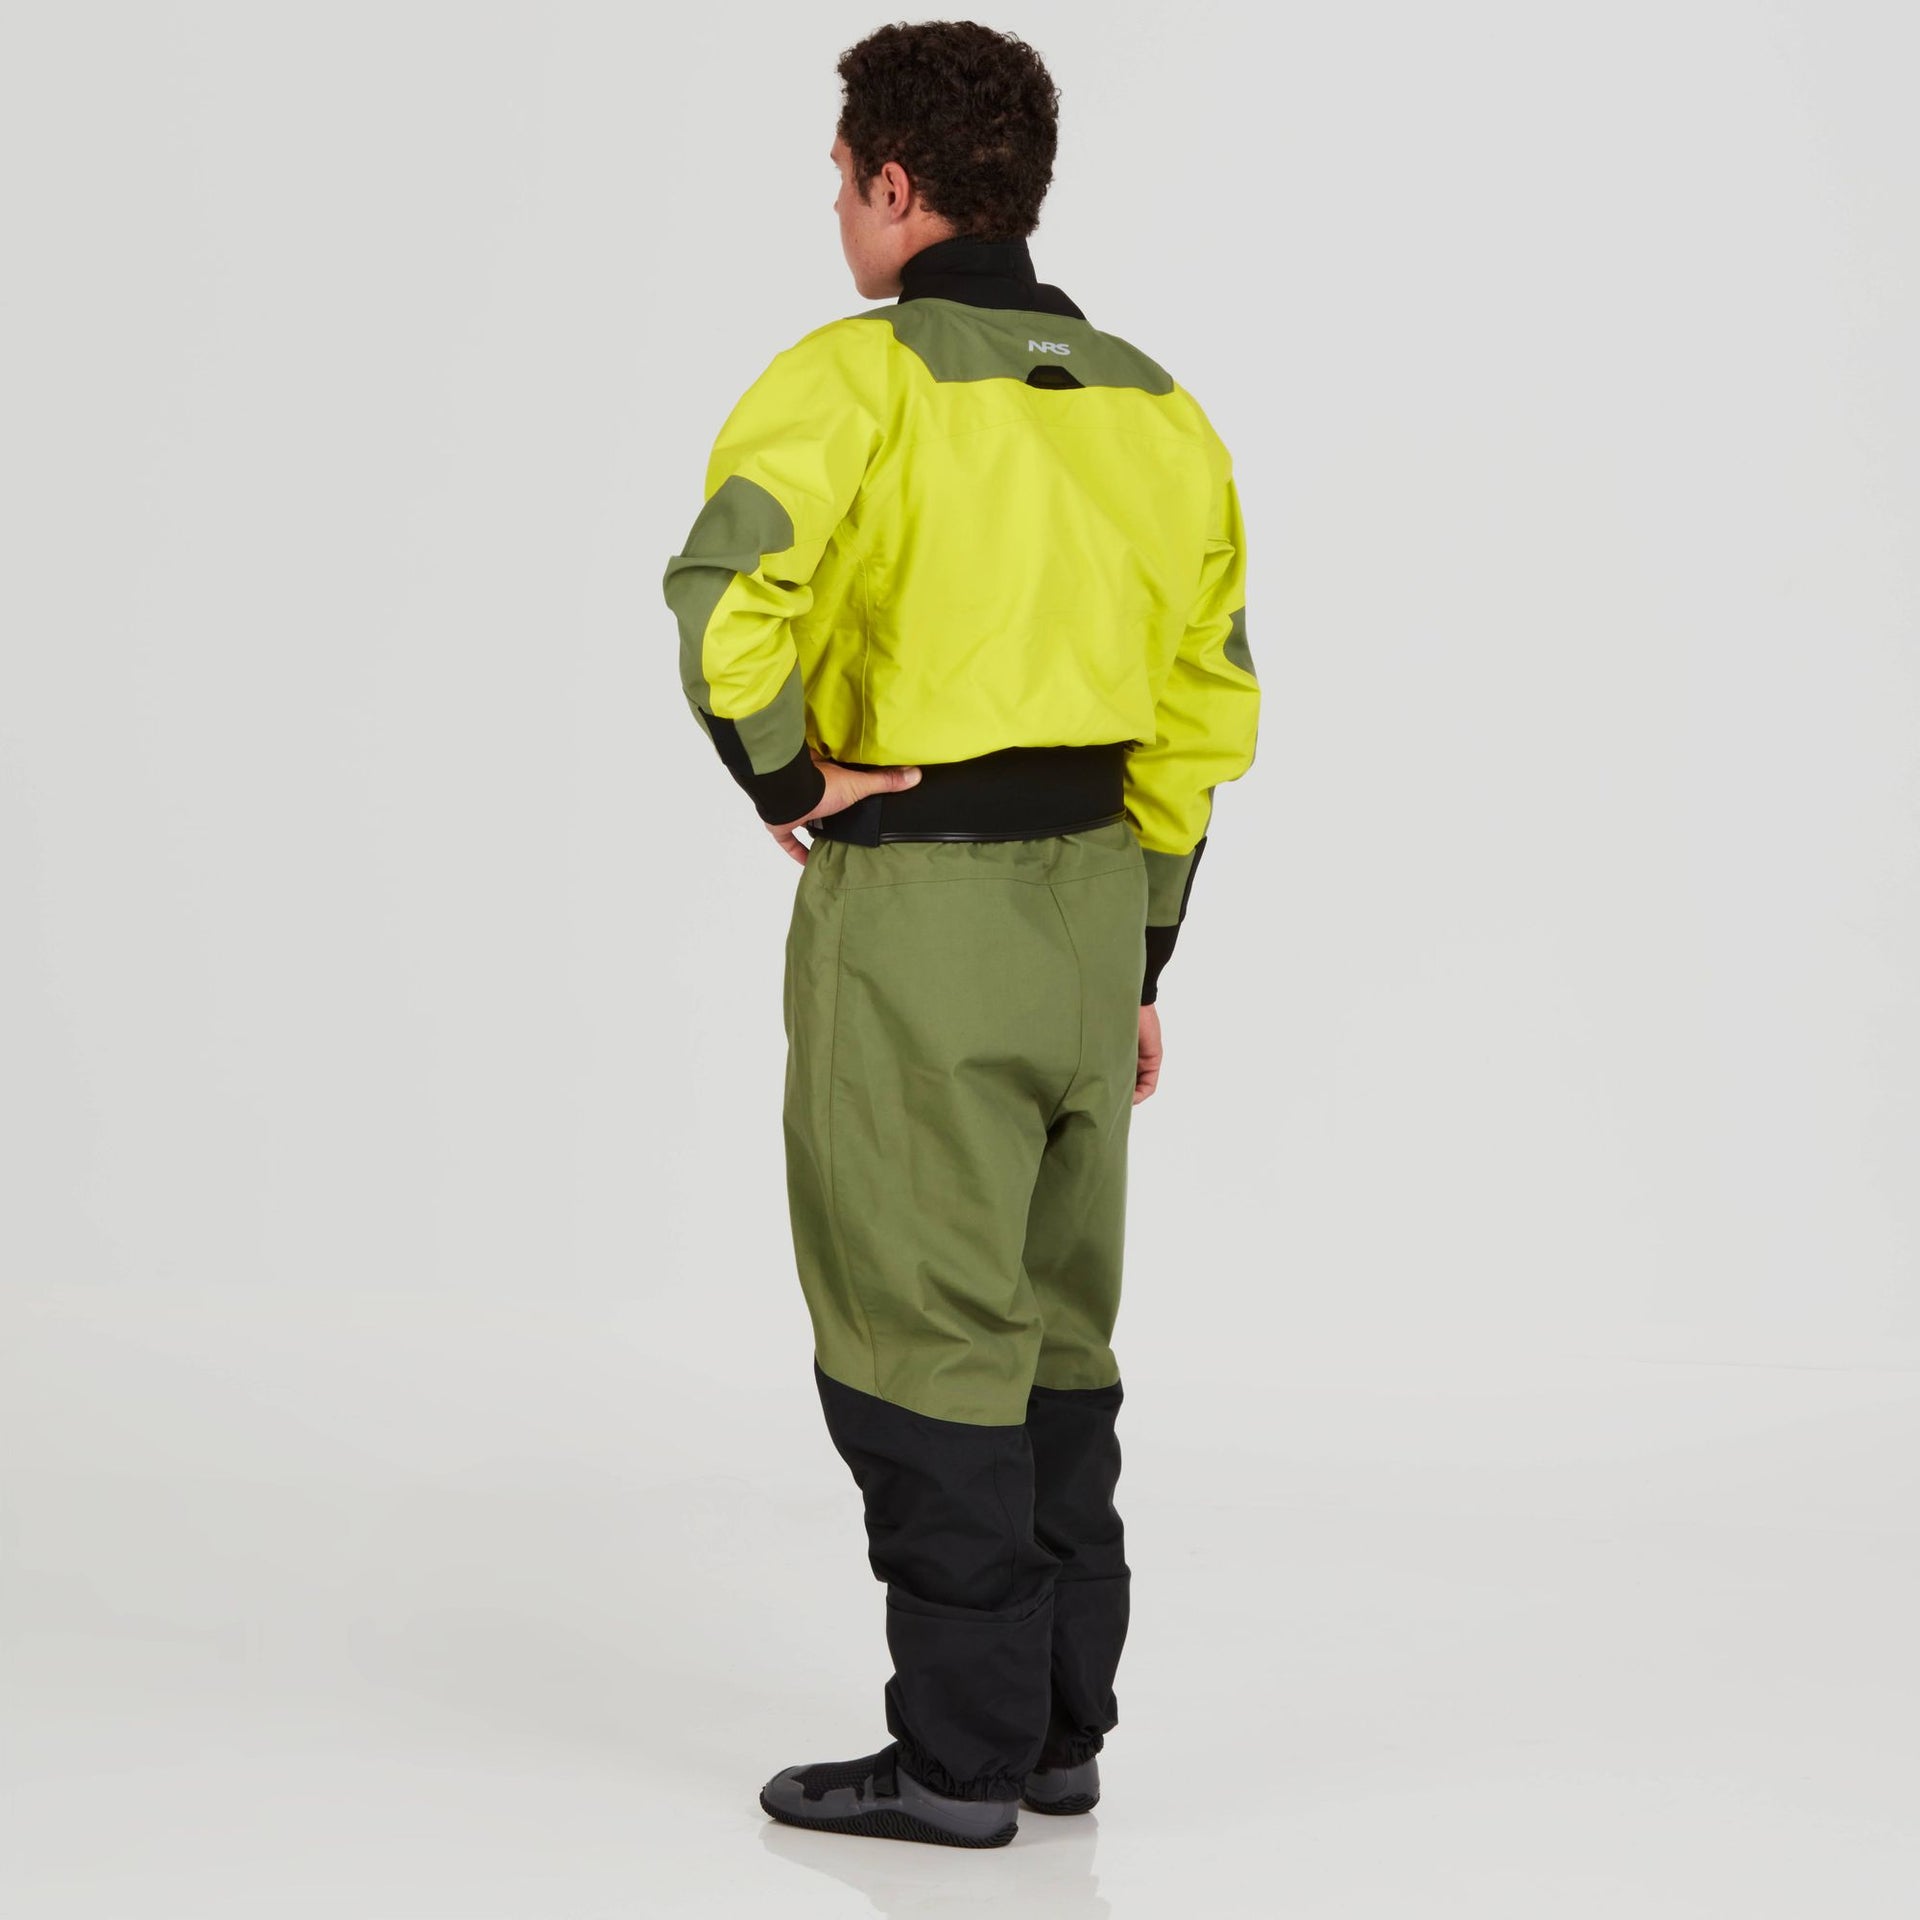 Men's Axiom GORE-TEX Pro - NRS Dry Suit (Chartreuse)